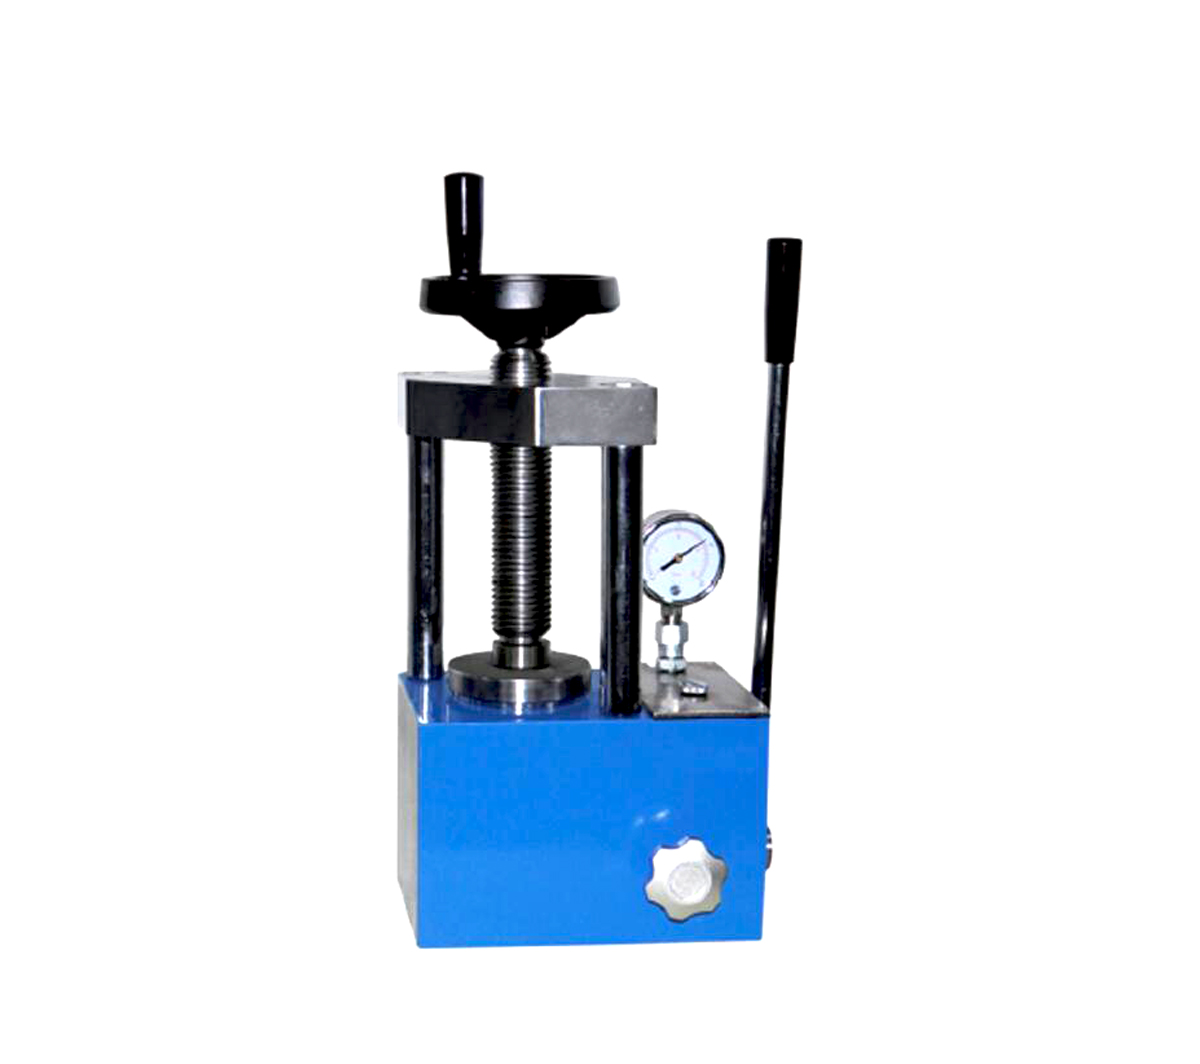 12T manually powder hydraulic press with pointer pressure gauge